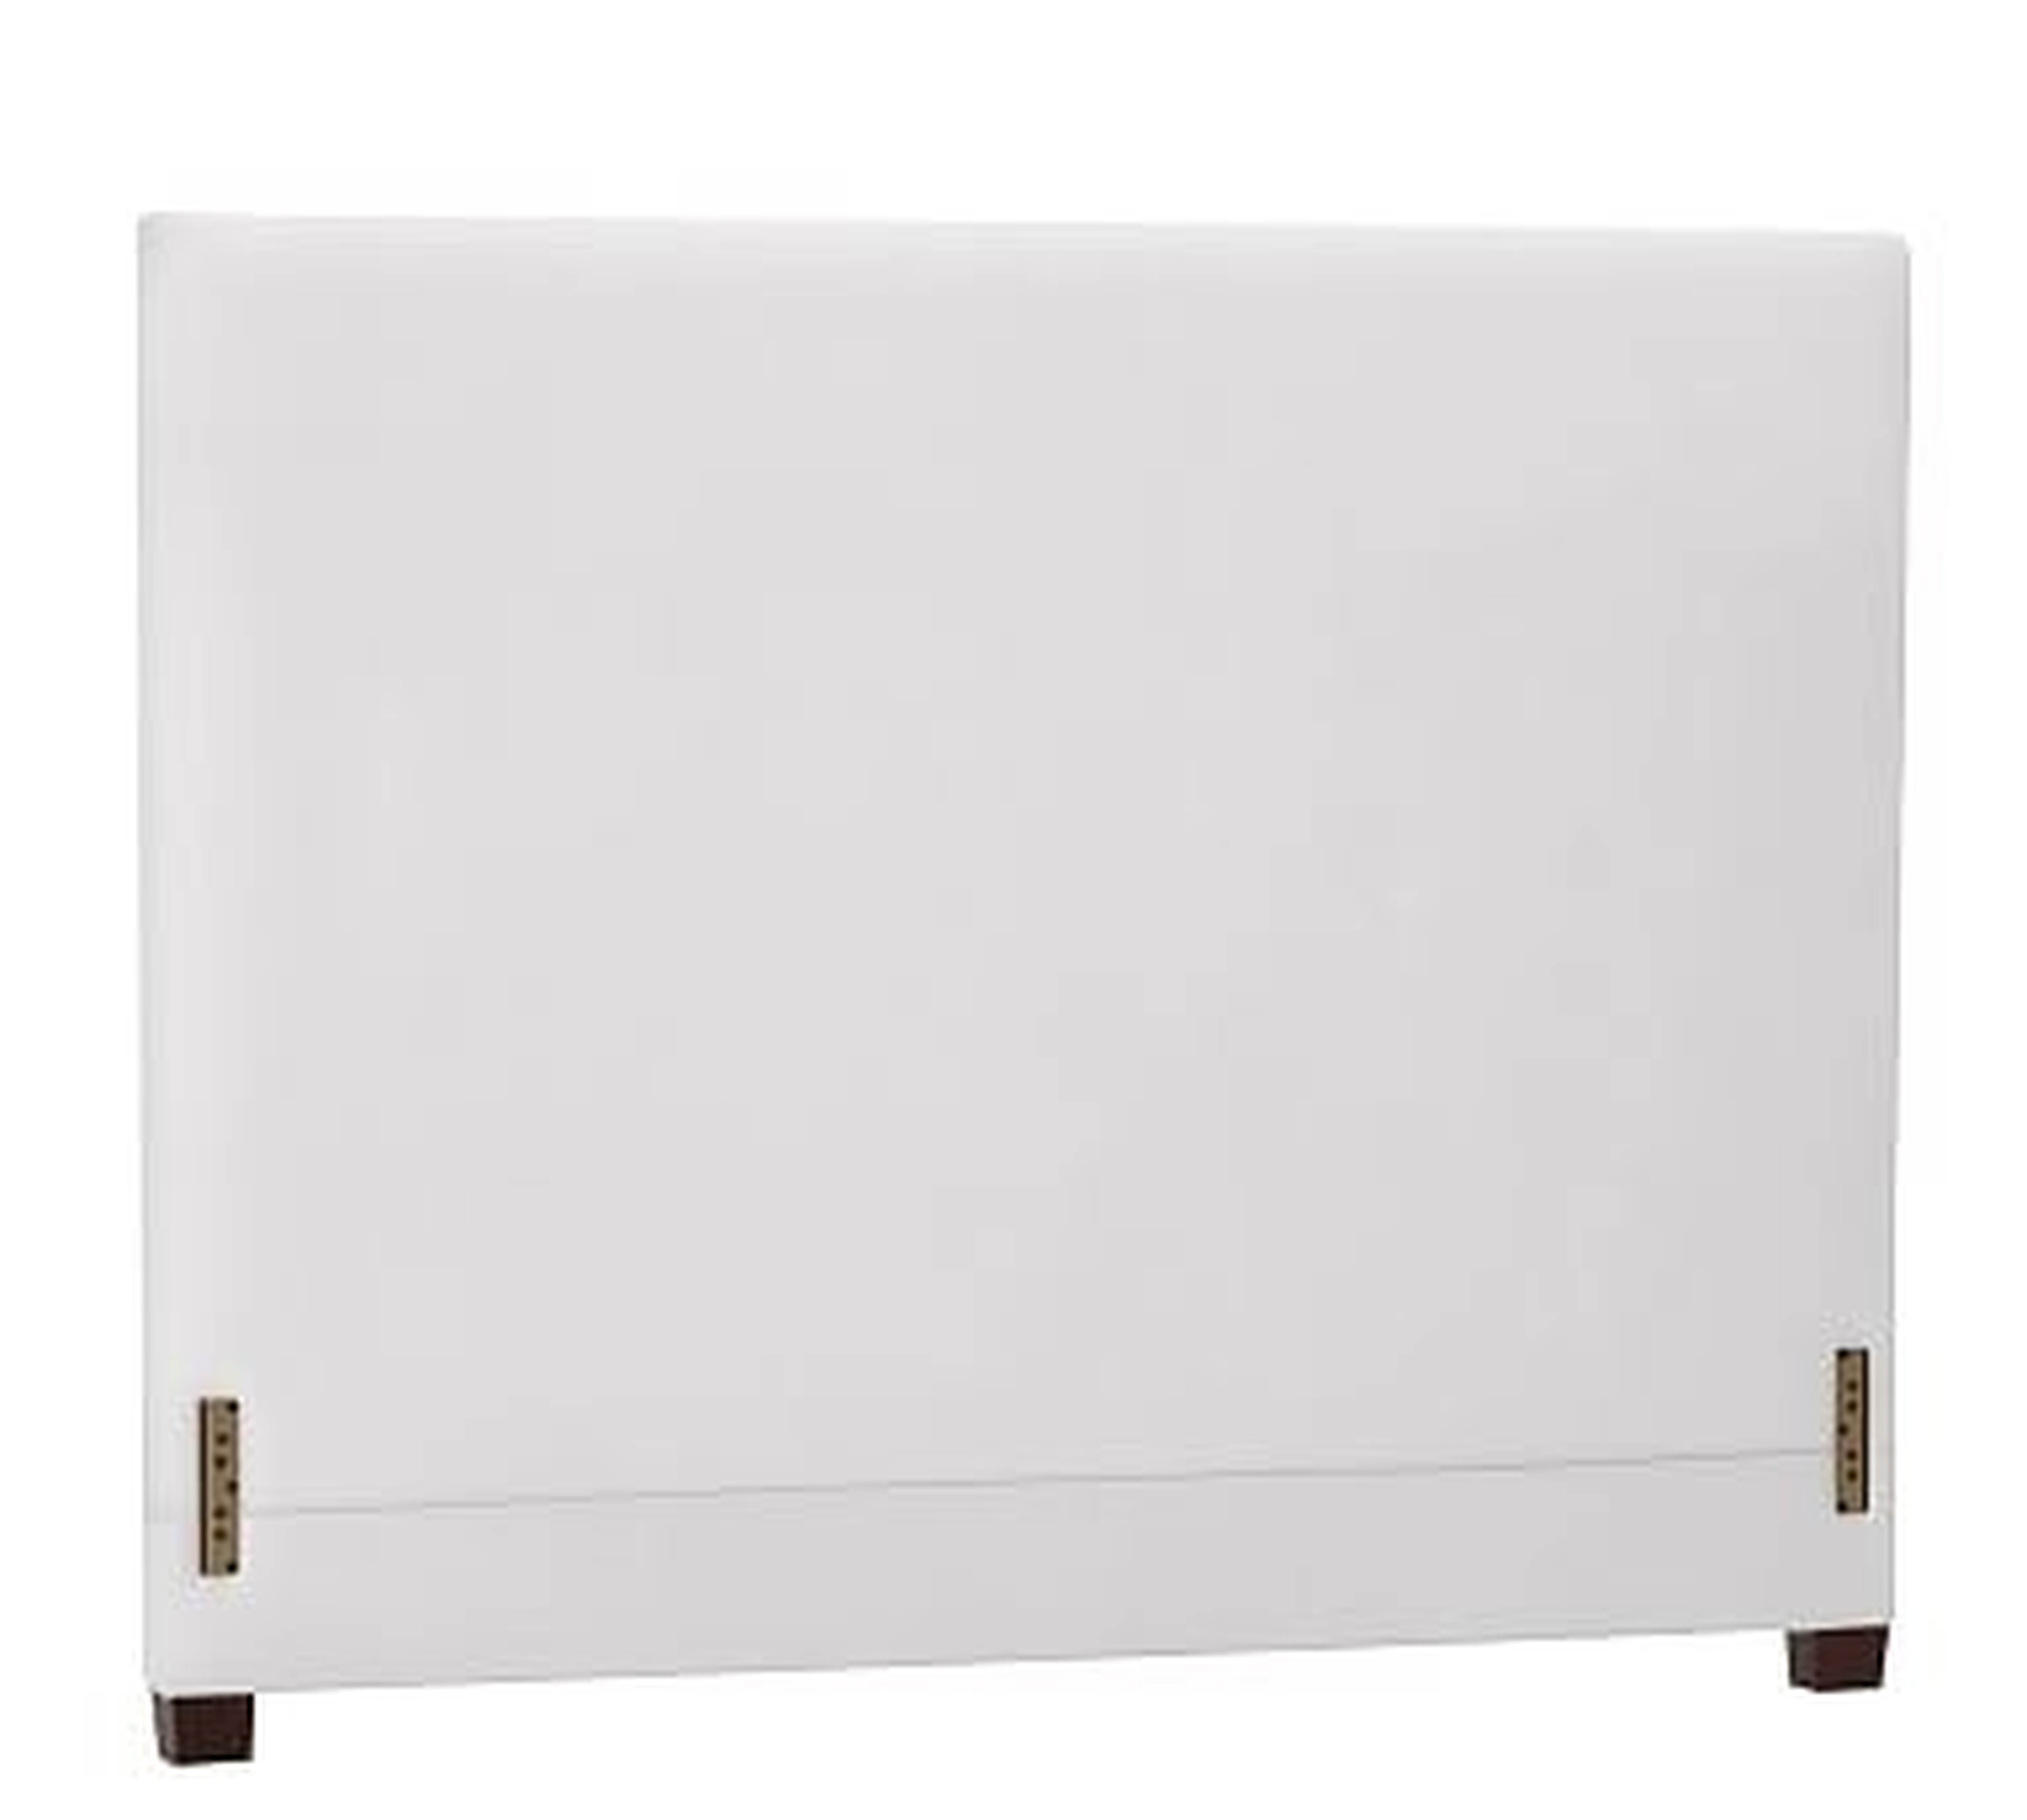 Raleigh Square Upholstered Tall Headboard 53"h, without Nailheads, King, Twill White - Pottery Barn